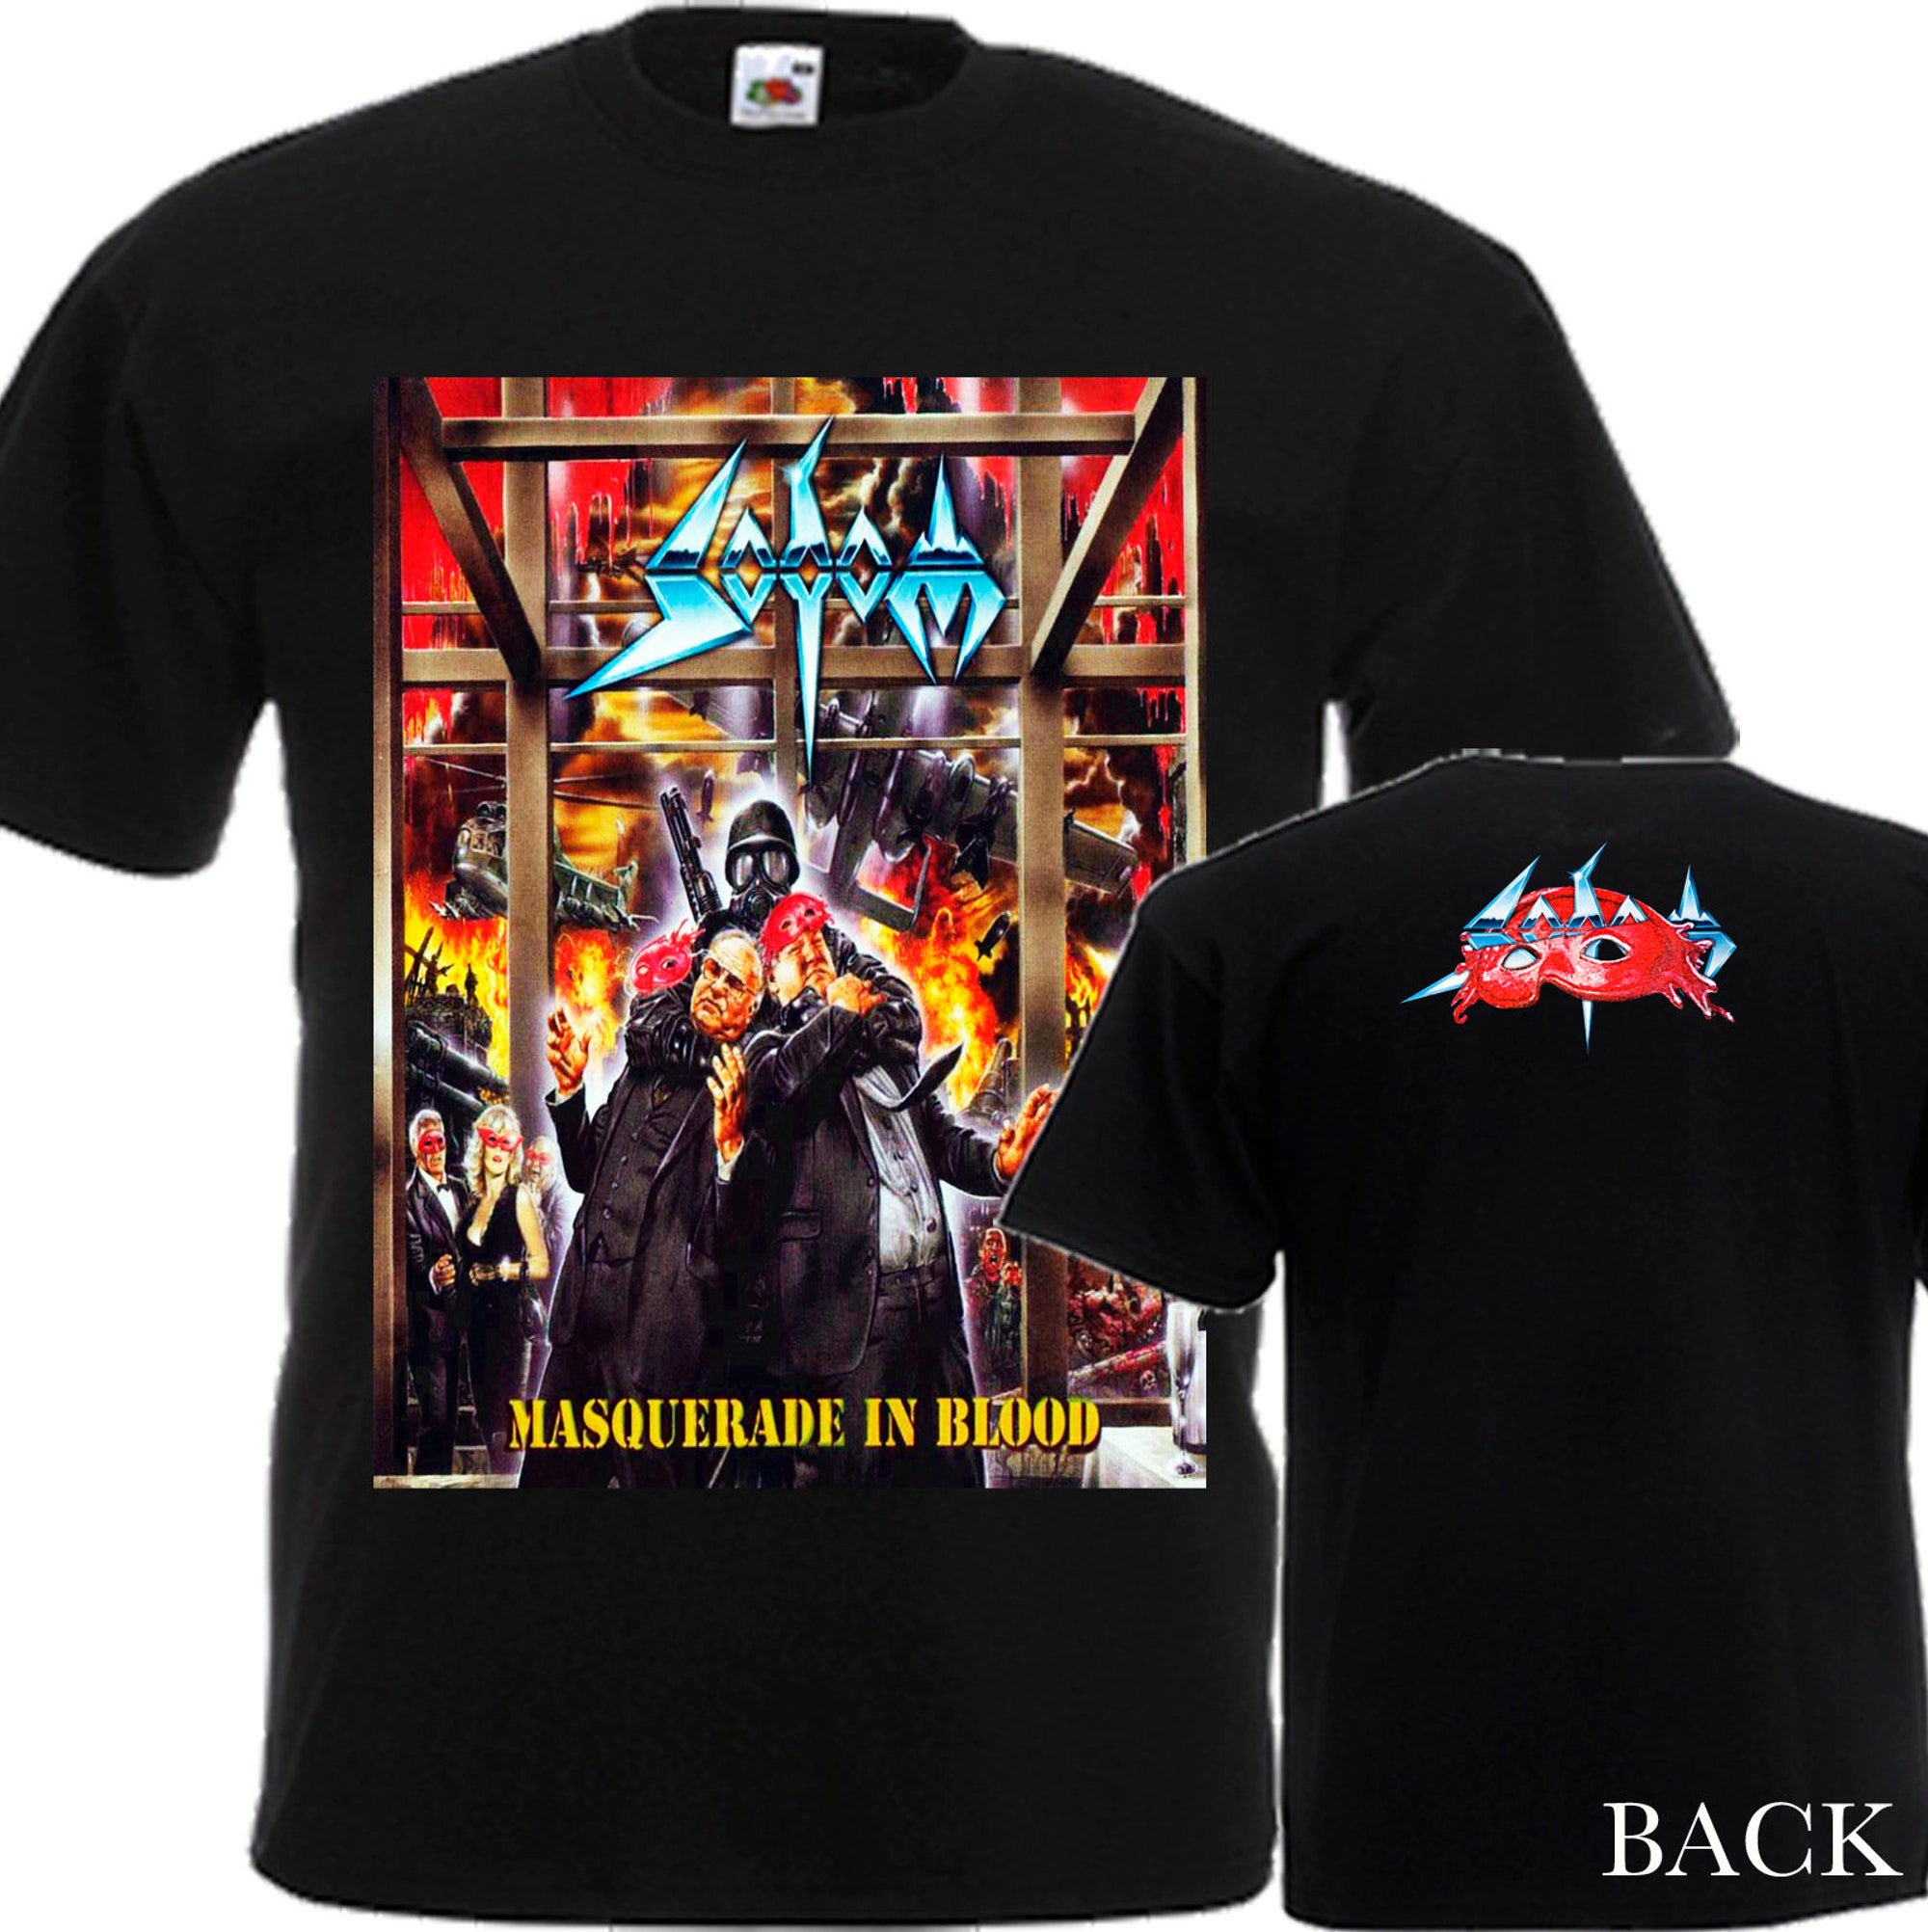 SODOM - Masquerade in Blood t-shirt